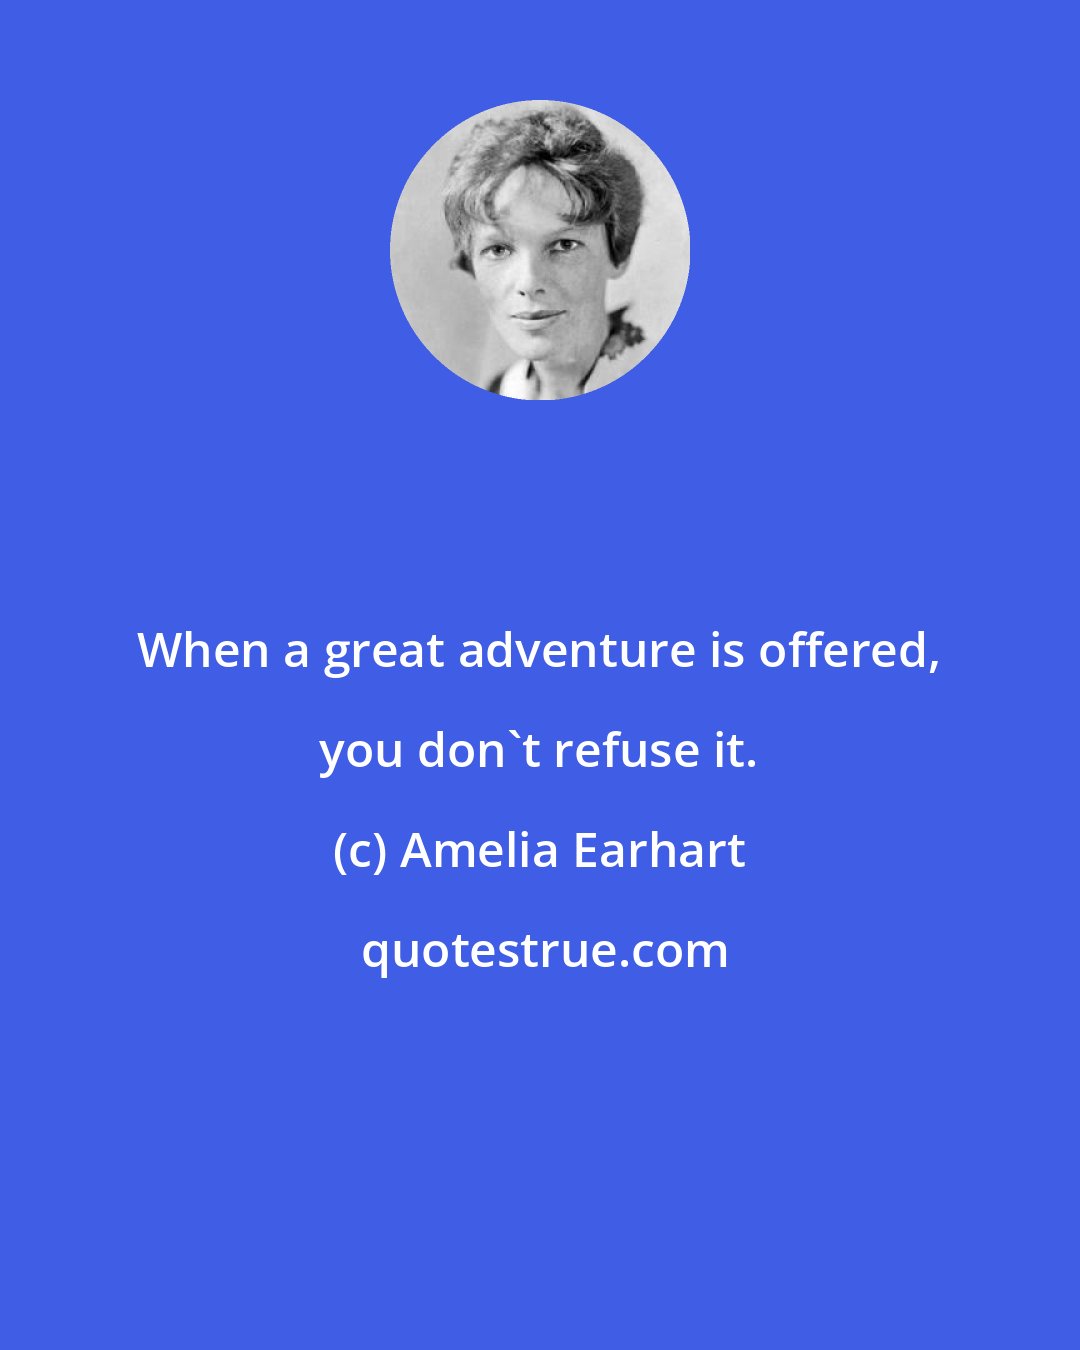 Amelia Earhart: When a great adventure is offered, you don't refuse it.